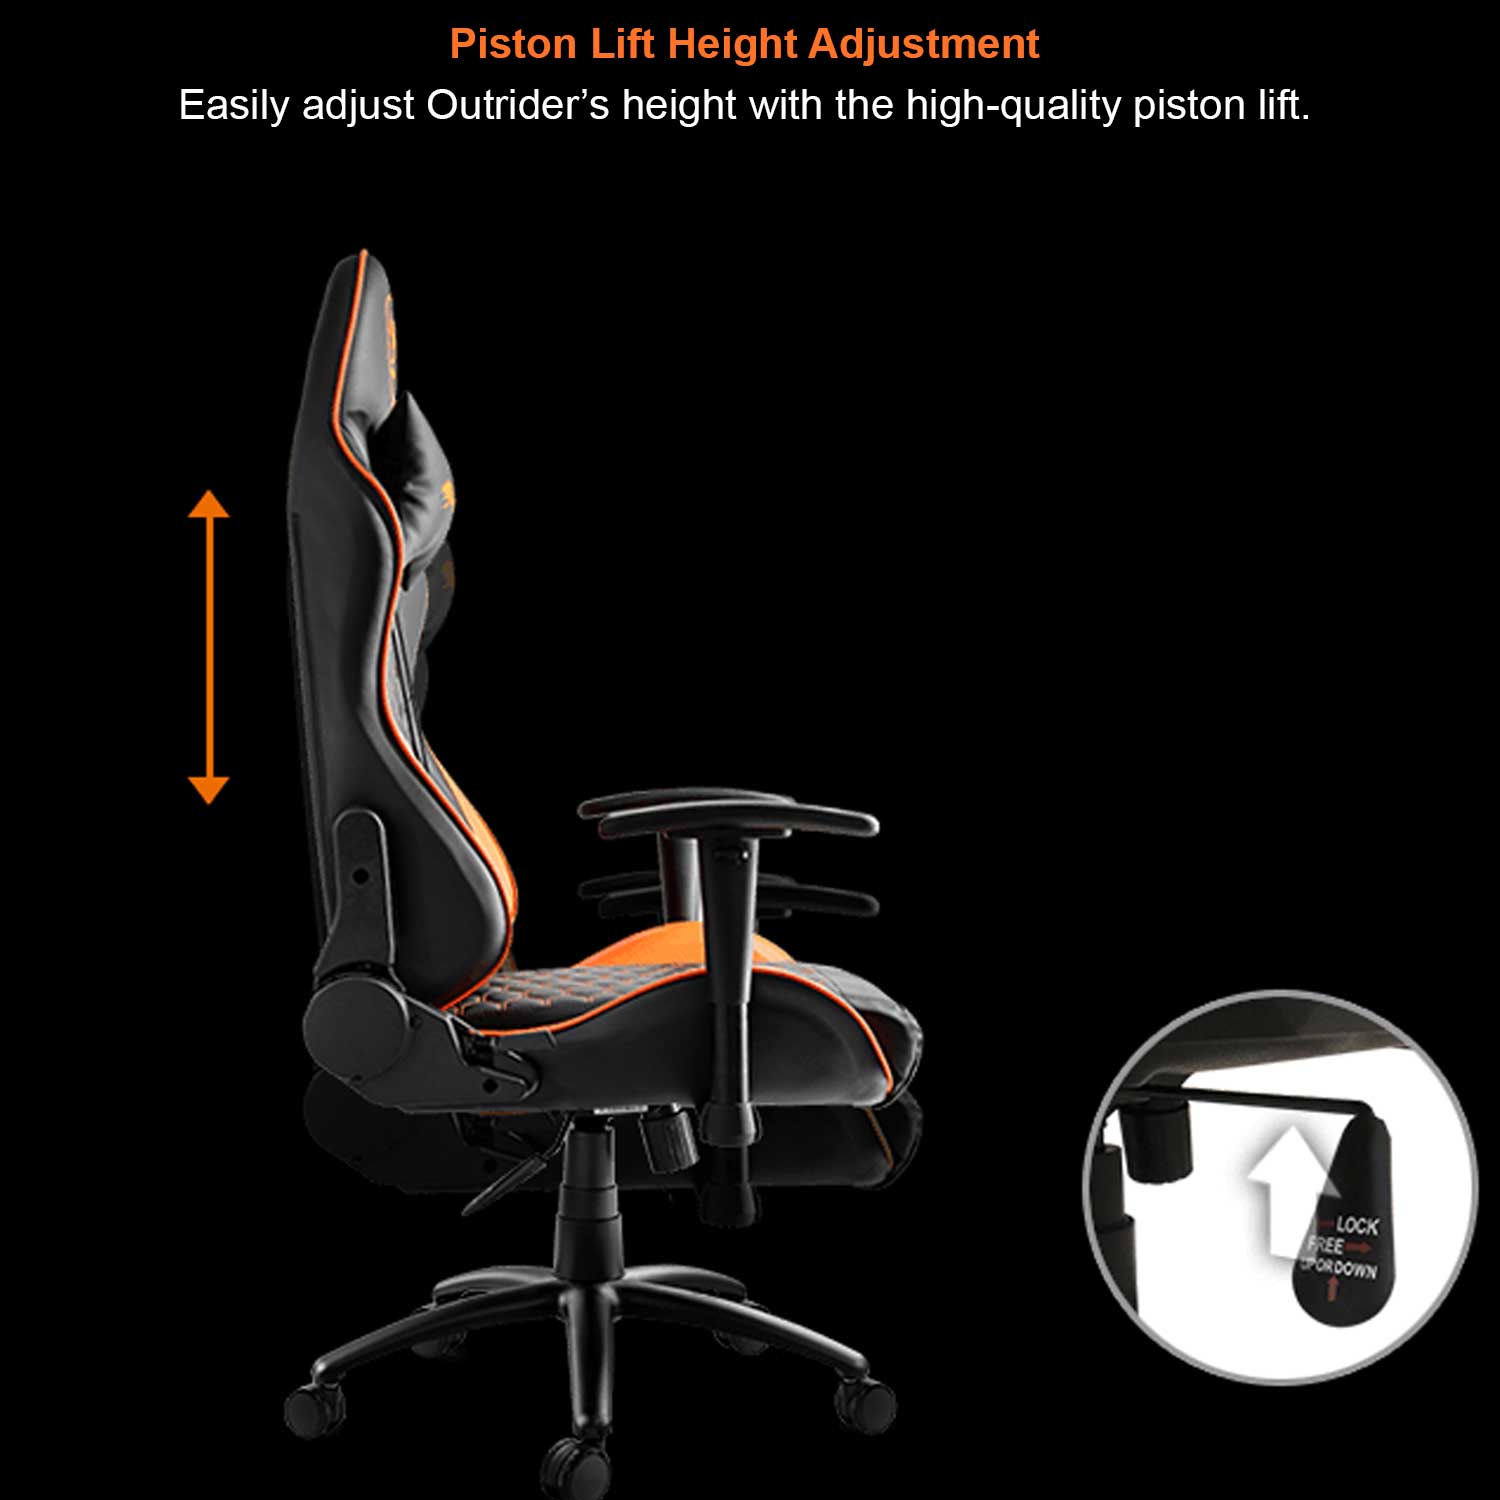 Cougar Outrider Comfort Gaming Chair - 3MORDNXB.0001